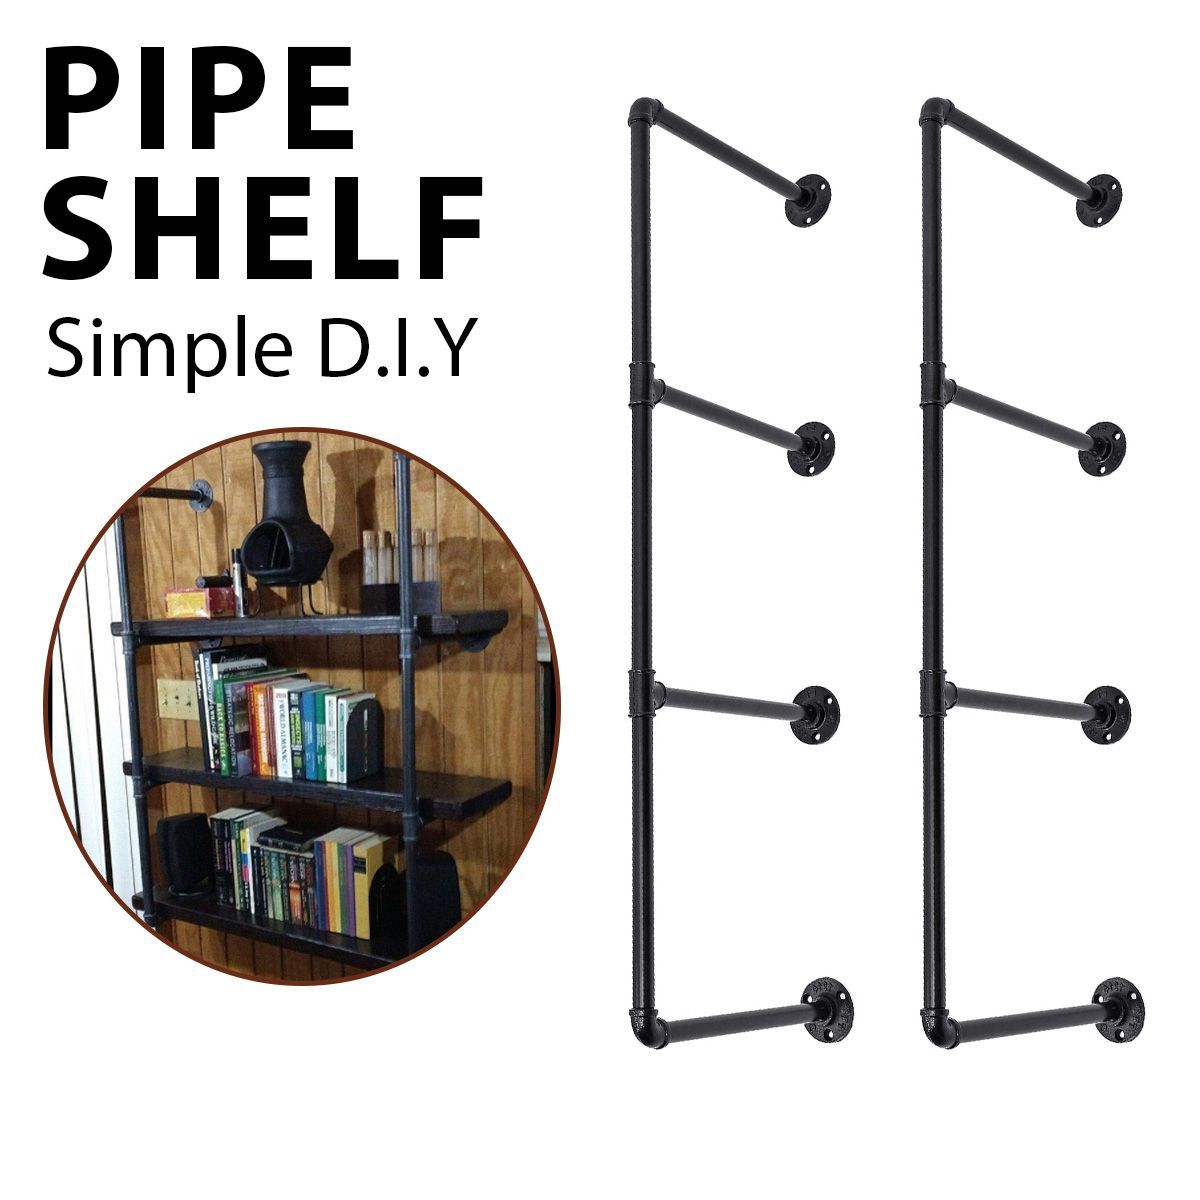 Industrial Wall-Mounted Iron Pipe Bracket Bookshelf Frame, Customizable DIY Shelving, Floating Open Display Storage for Home, Office, Commercial Use -   diy Bookshelf short